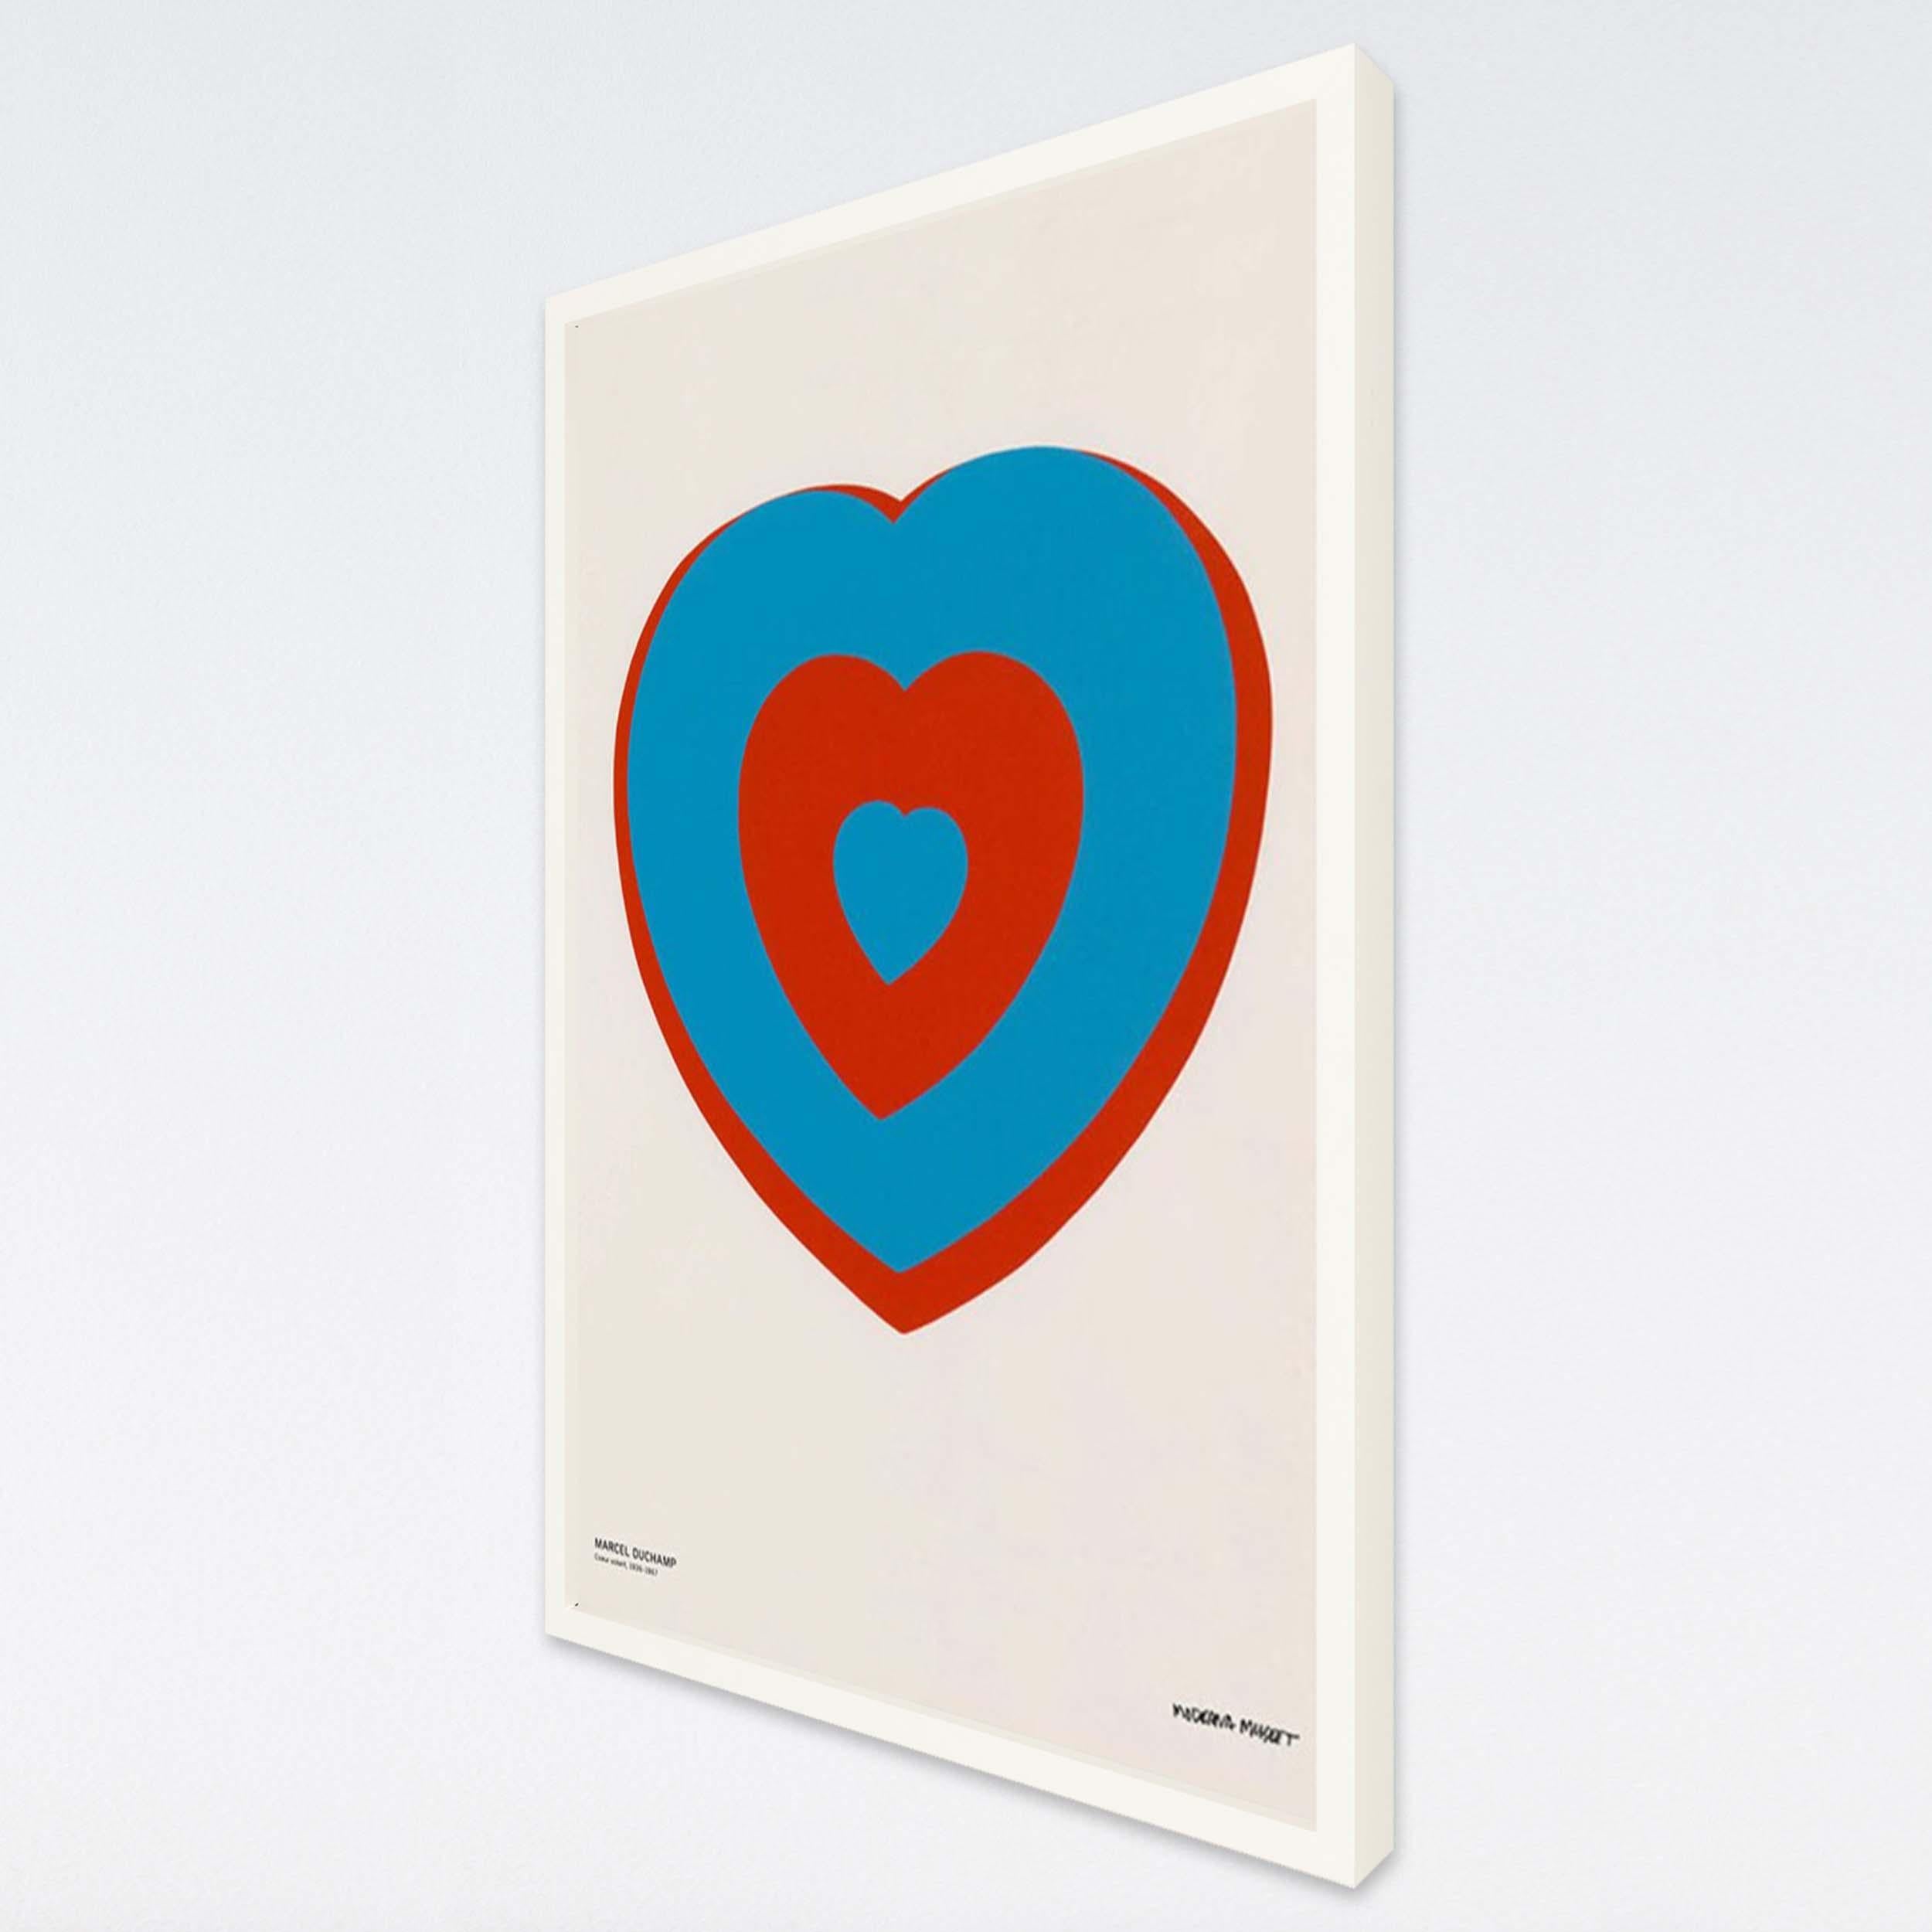 MARCEL DUCHAMP
COEUR VOLANT (FLUTTERING HEART), 2012
Poster
39 3/8 x 27 1/2 in
100 x 70 cm

Condition: Very good. Very light signs of age or handling. 

A poster by Moderna Museet, Sweden. Features an image of the iconic work 